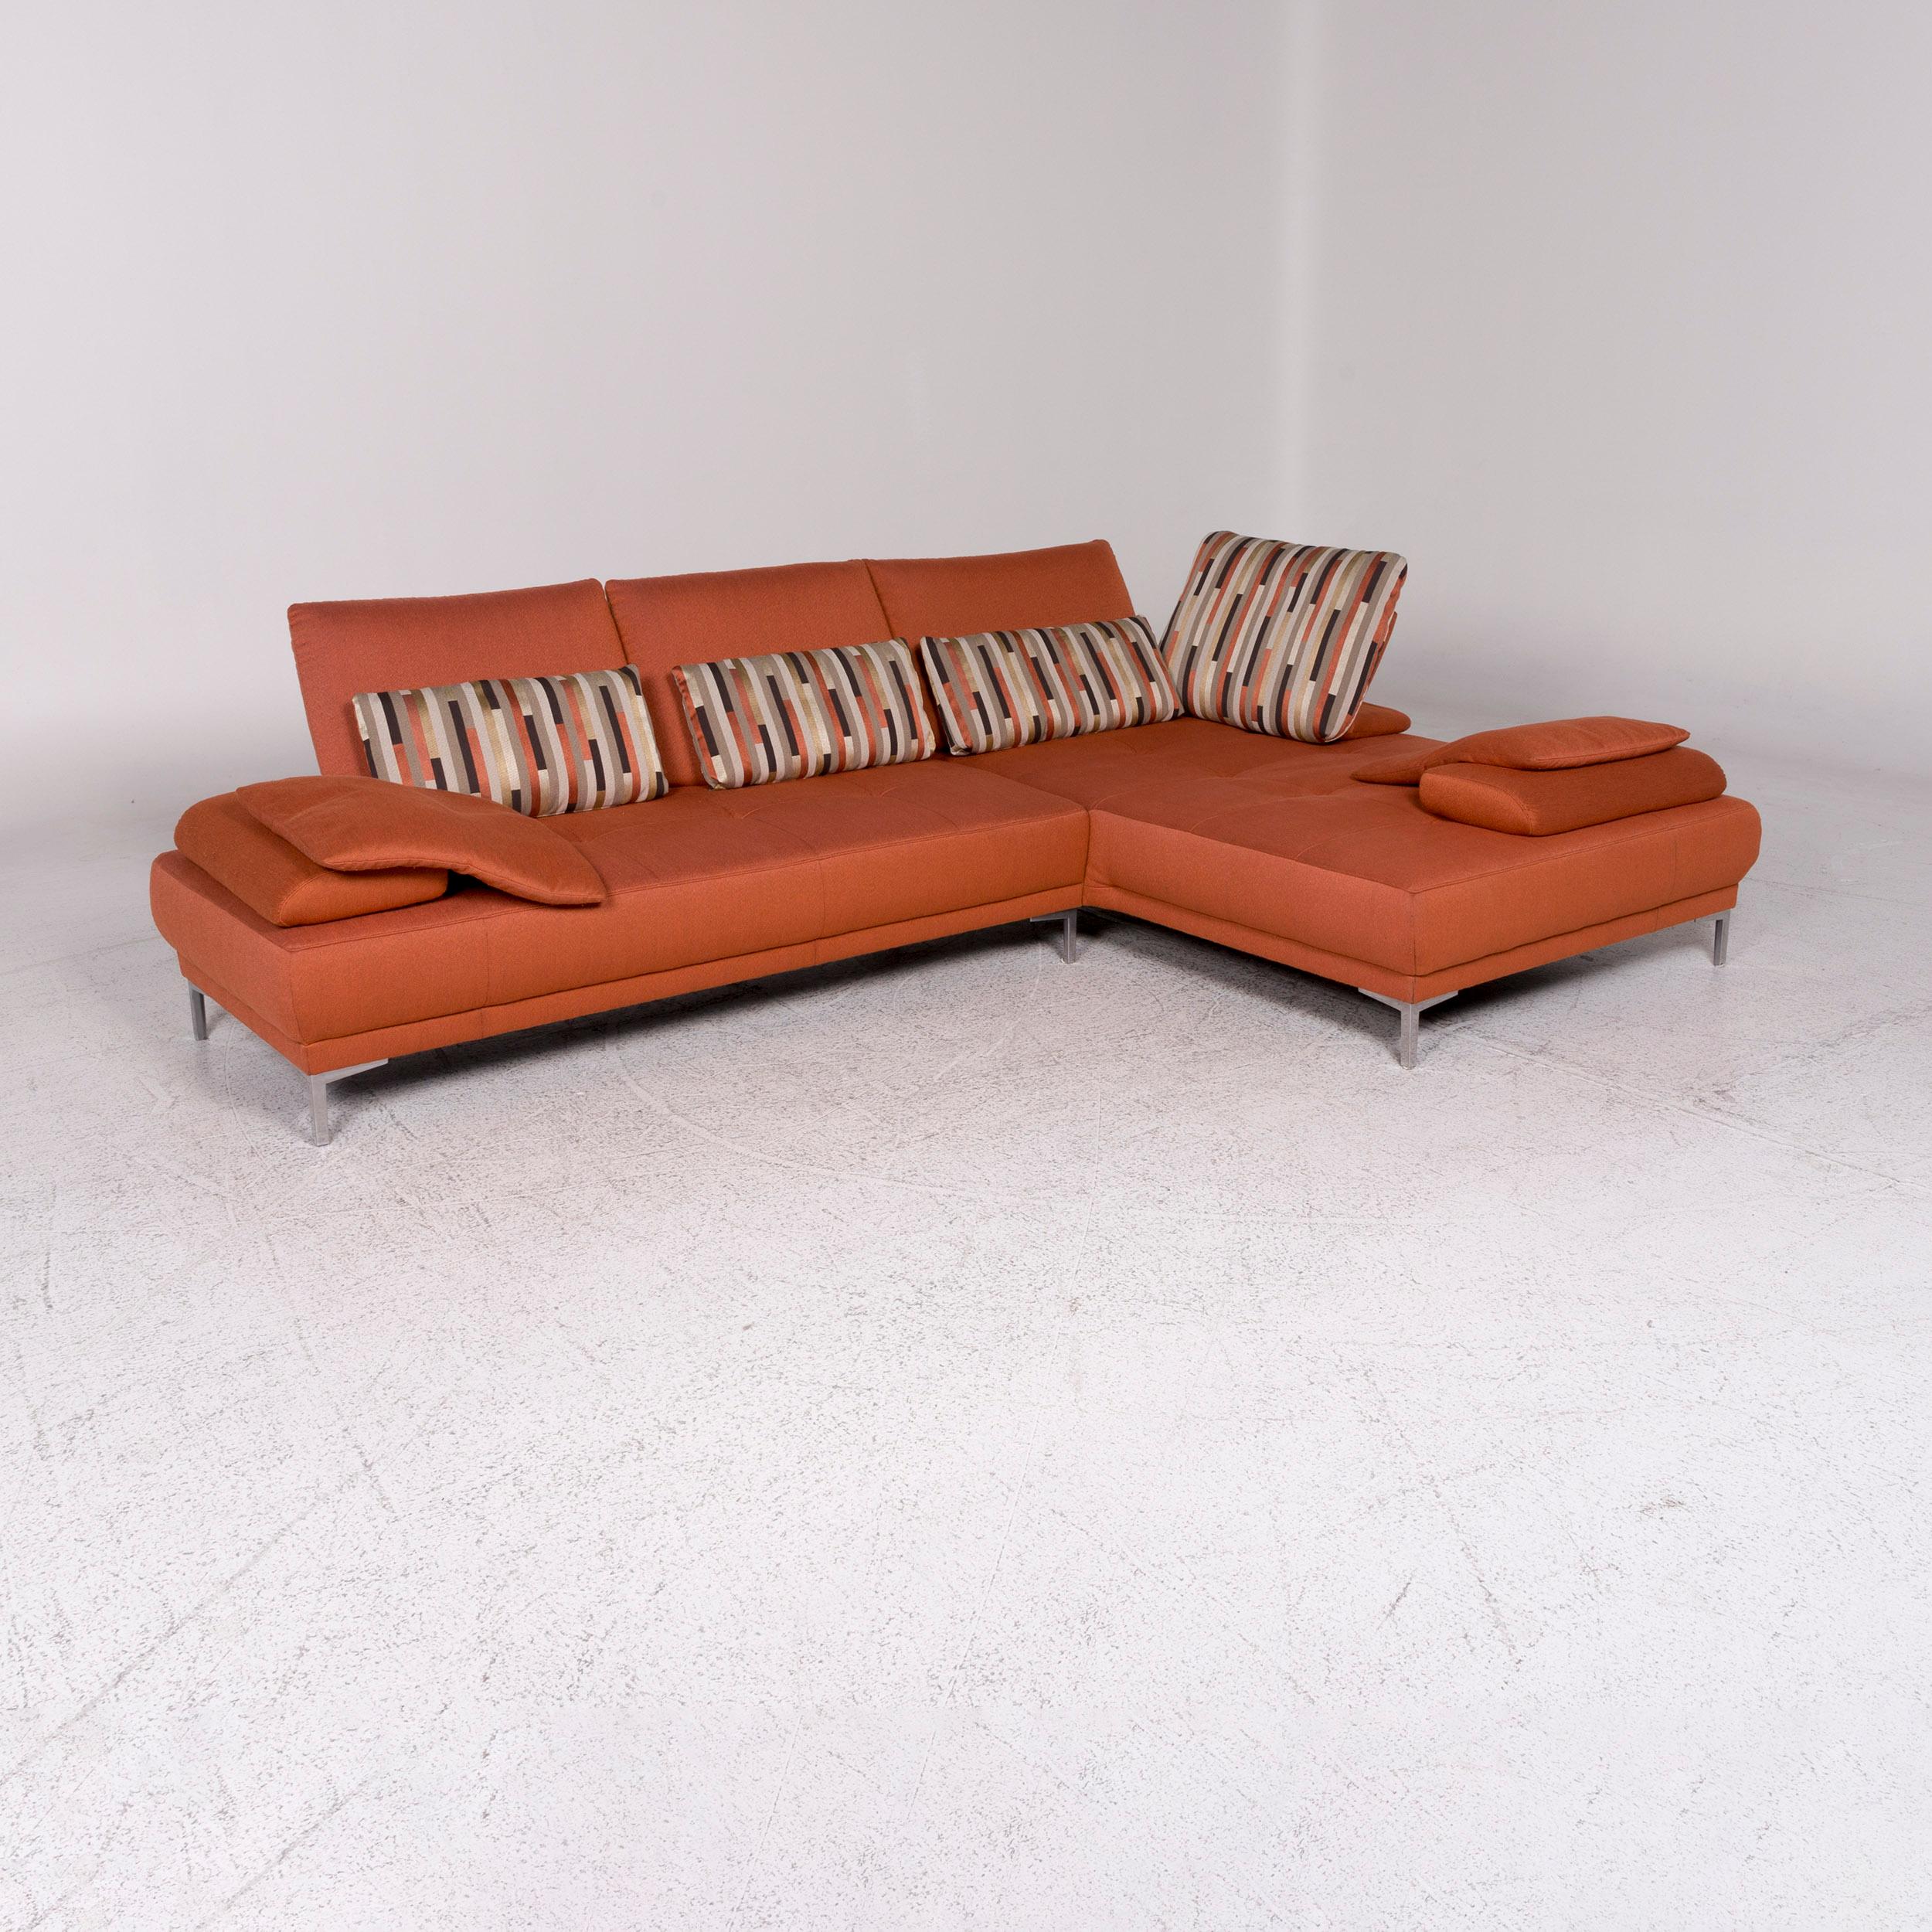 We bring to you a Willi Schillig fabric sofa Orange corner sofa.
 
 Product measurements in centimeters:
 
 depth 94
 width 291
 height 83
 seat-height 41
 rest-height 53
 seat-depth 59
 seat-width 215
 back-height 42.

  